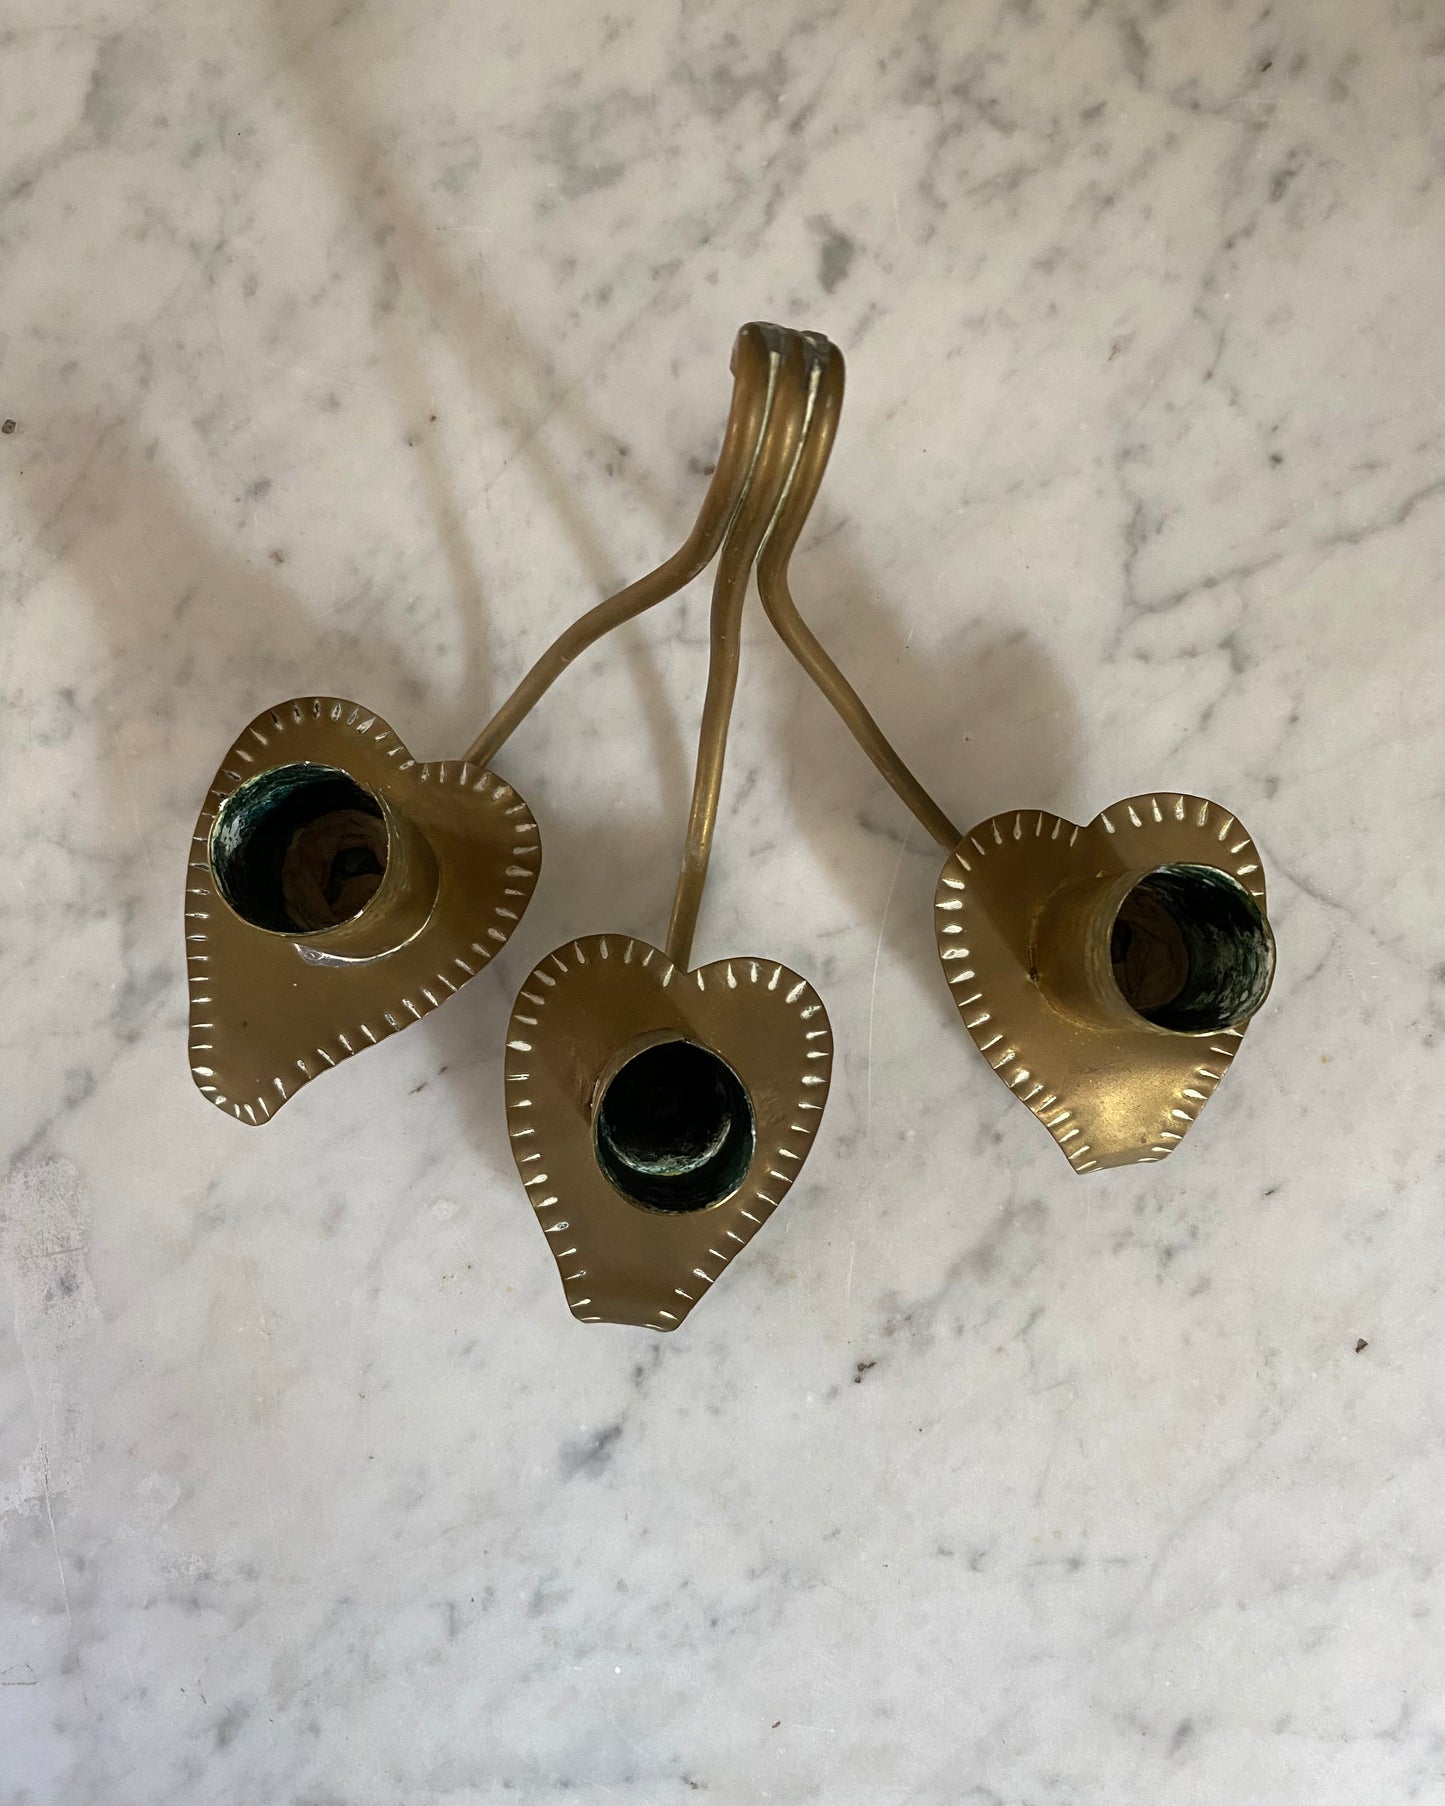 Pair of three - armed brass wall sconces